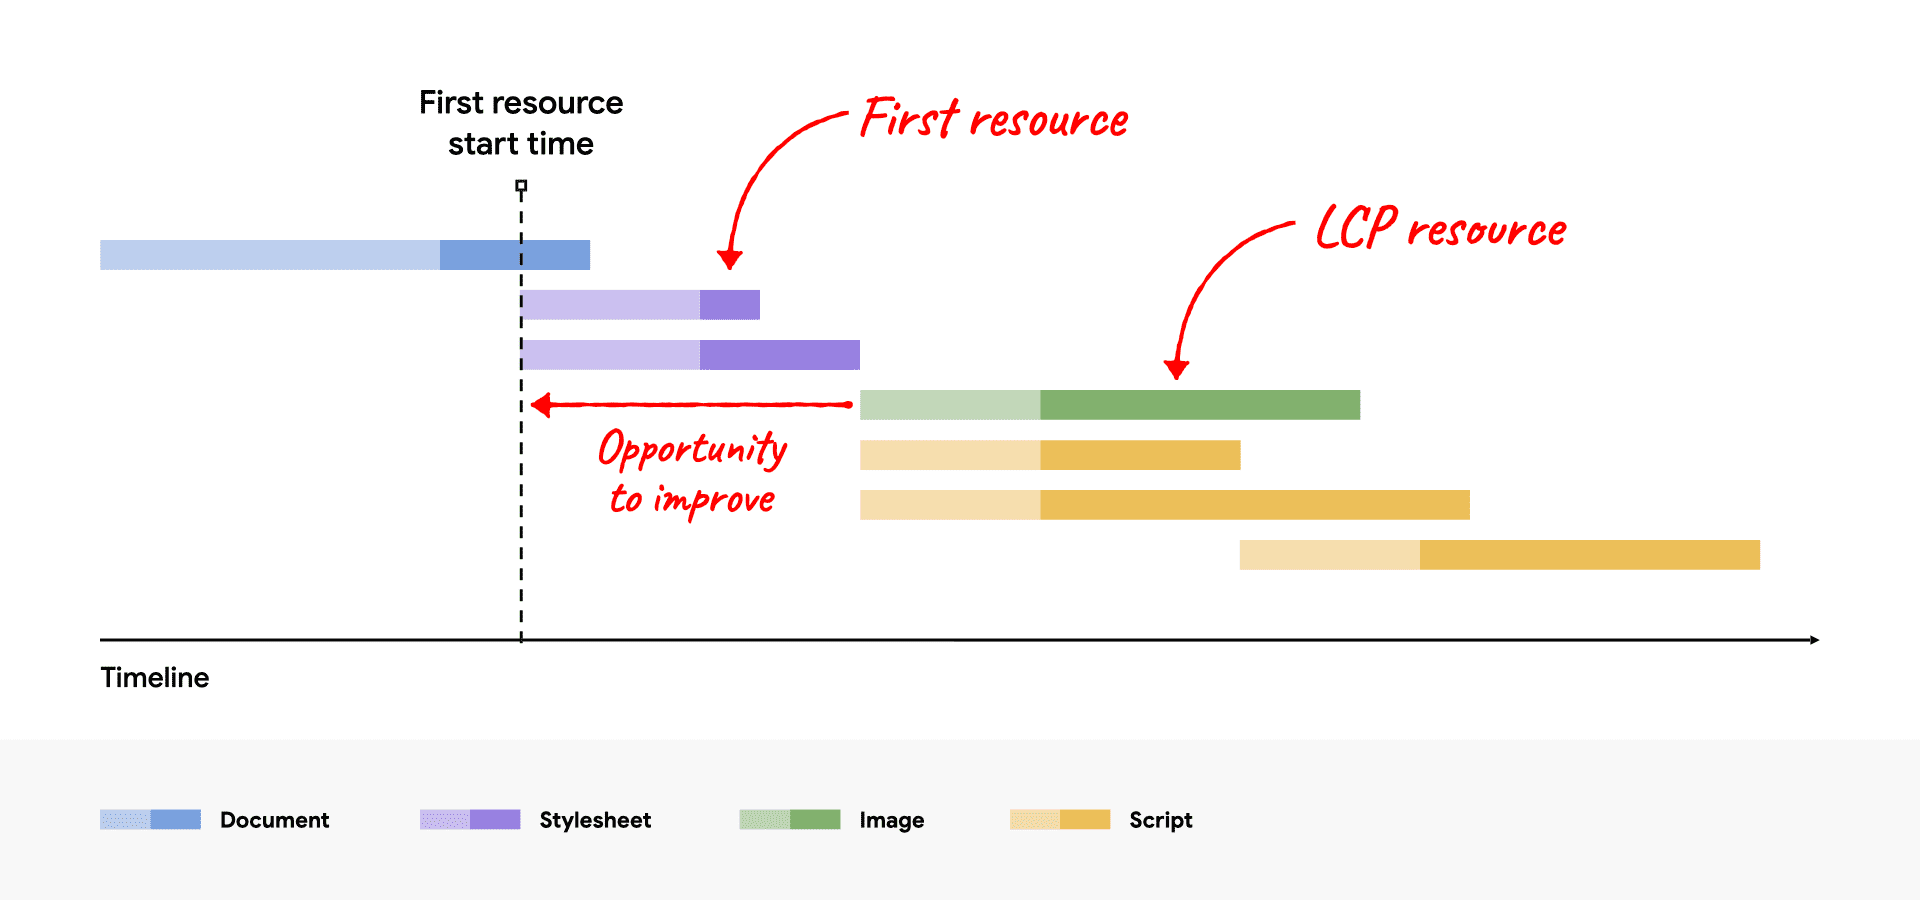 A network waterfall diagram showing the LCP resource starting after the first resource, showing the opportunity for improvement